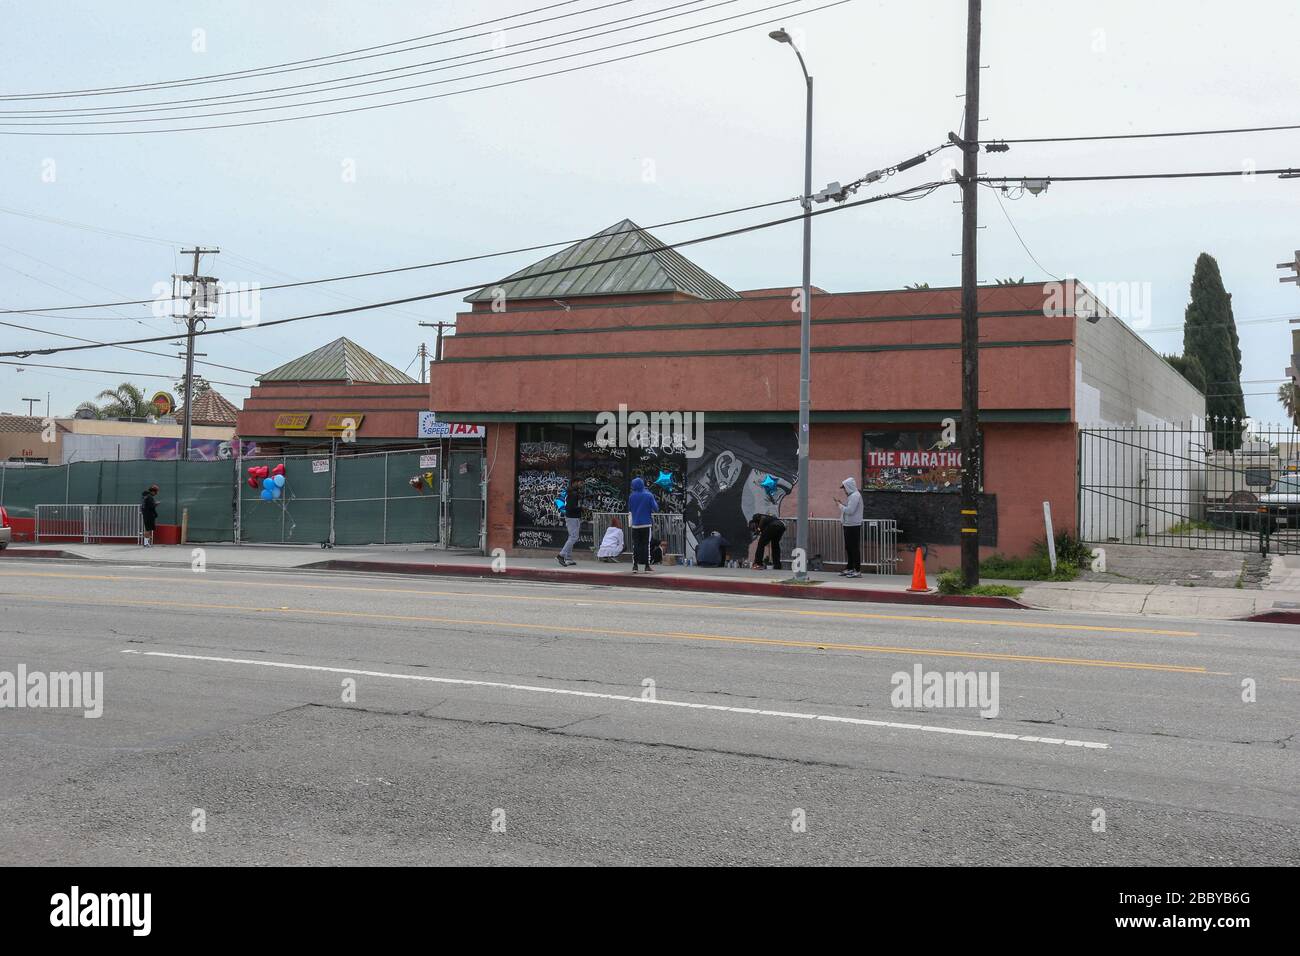 General view of Nipsey Hussle The Marathon store, located at 3420 W Slauson Ave F, in the wake of the coronavirus COVID-19 pandemic, on Tuesday, March 31, 2020 in Los Angeles, California, USA. (Photo by IOS/Espa-Images) Stock Photo